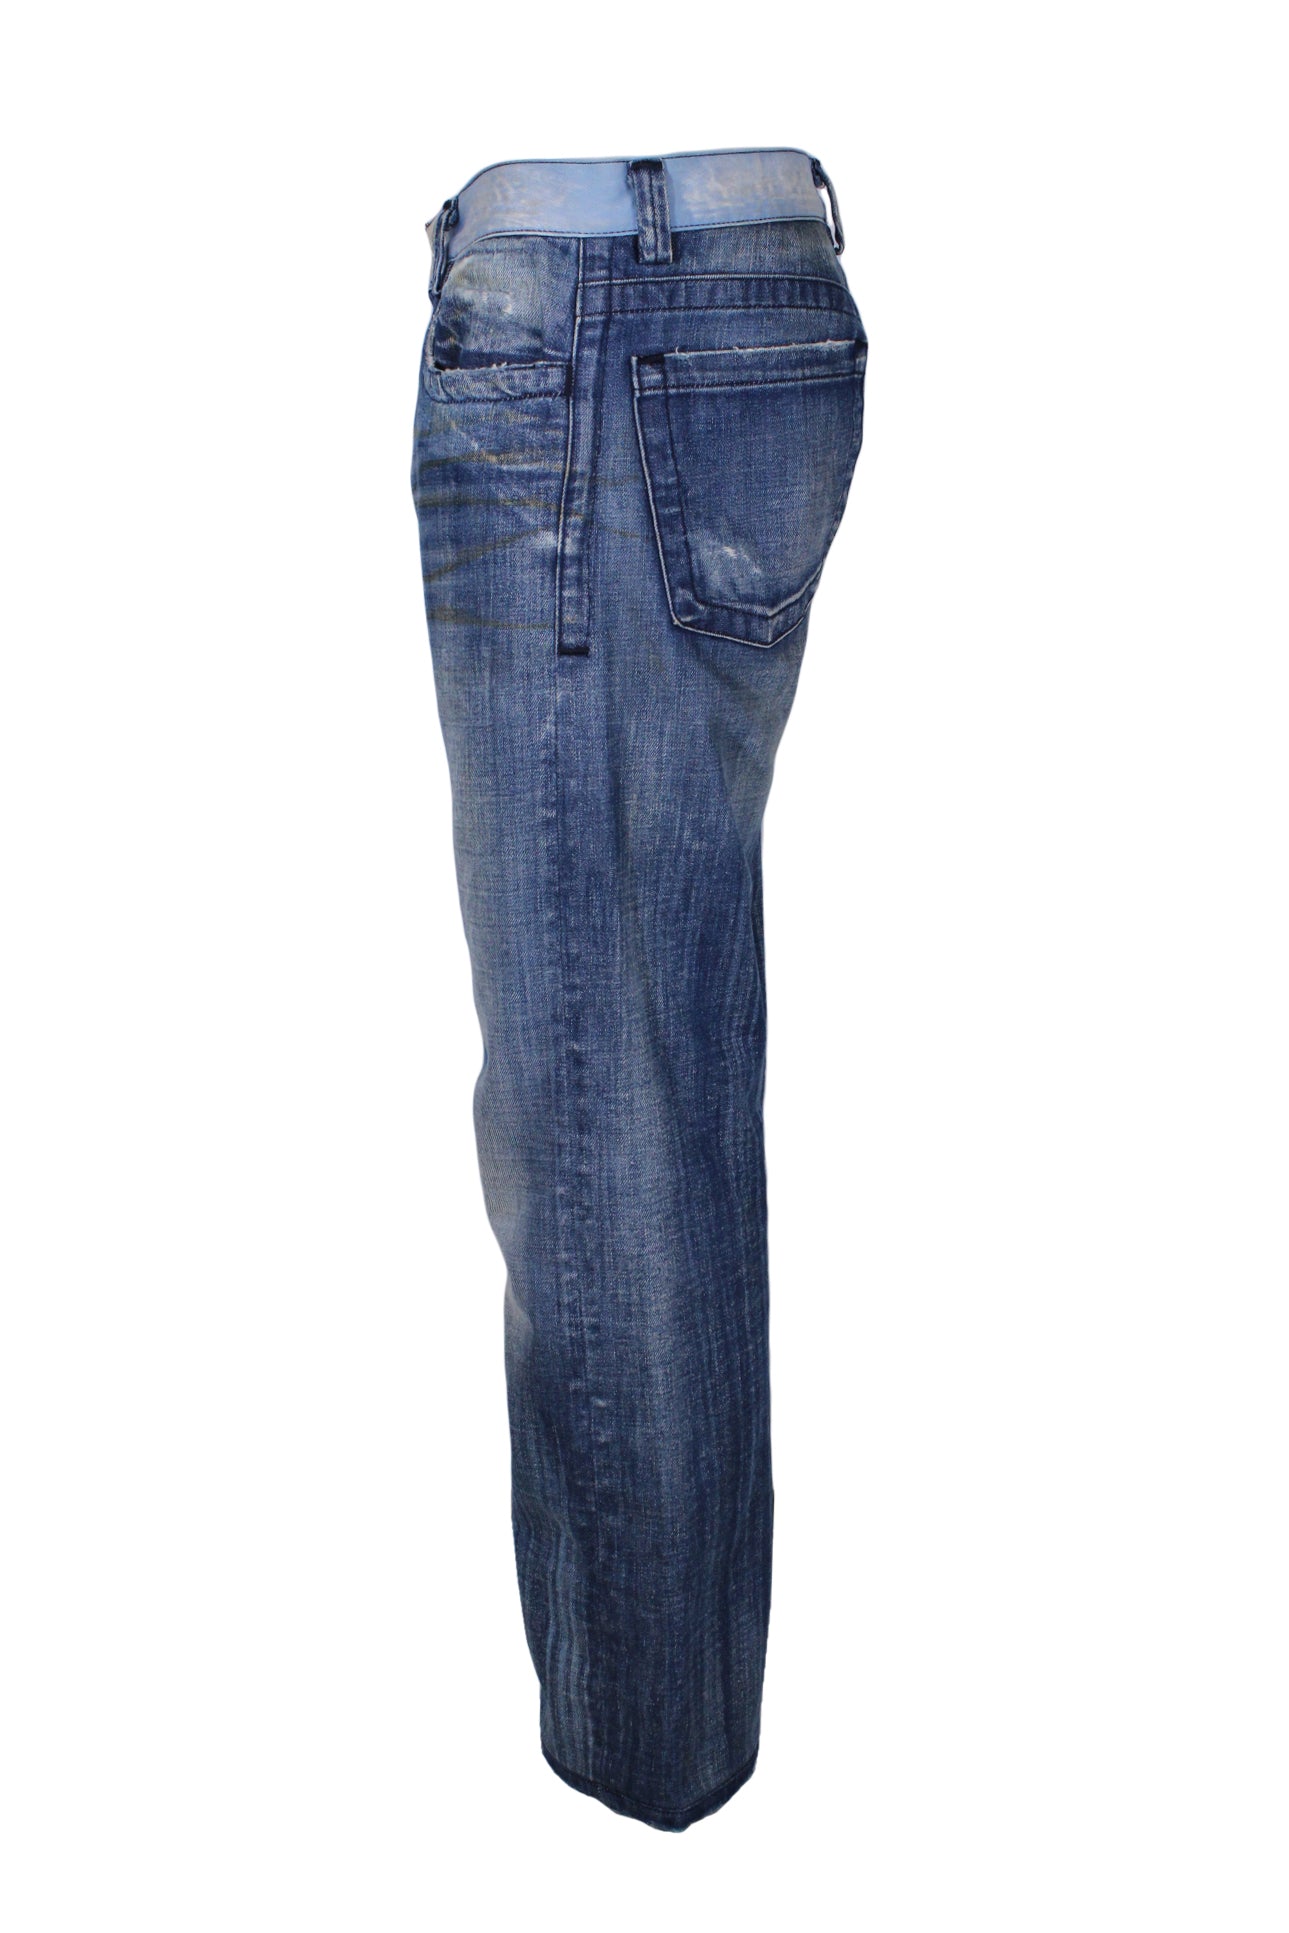 side angle of distressed diesel blue jeans. 